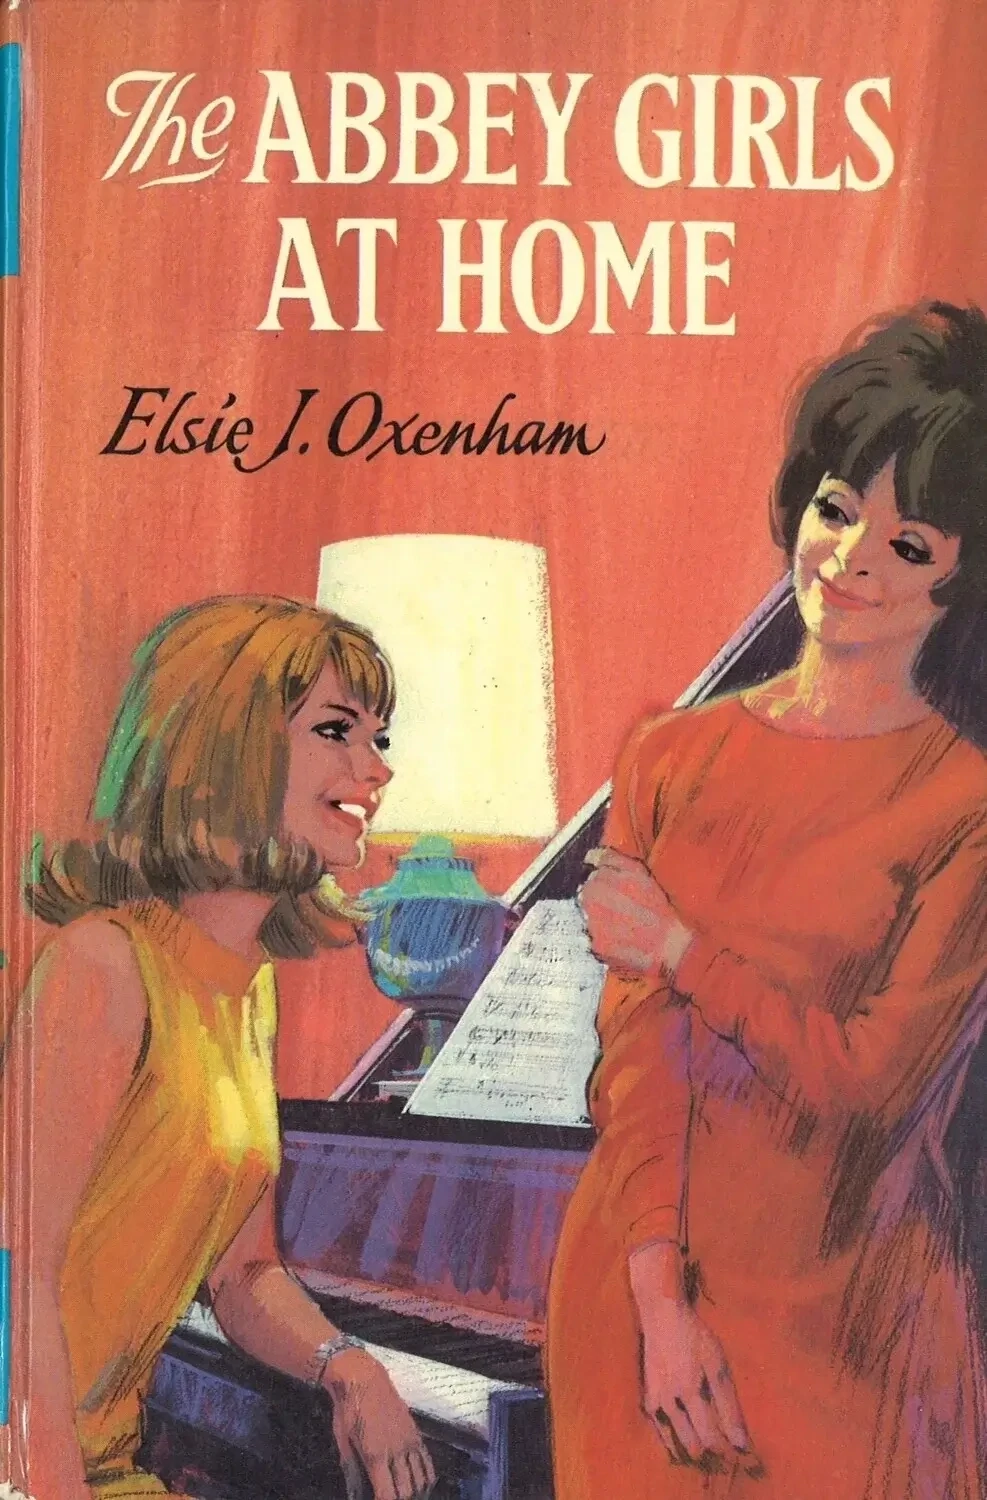 The Abbey Girls At Home, Elsie J. Oxenham